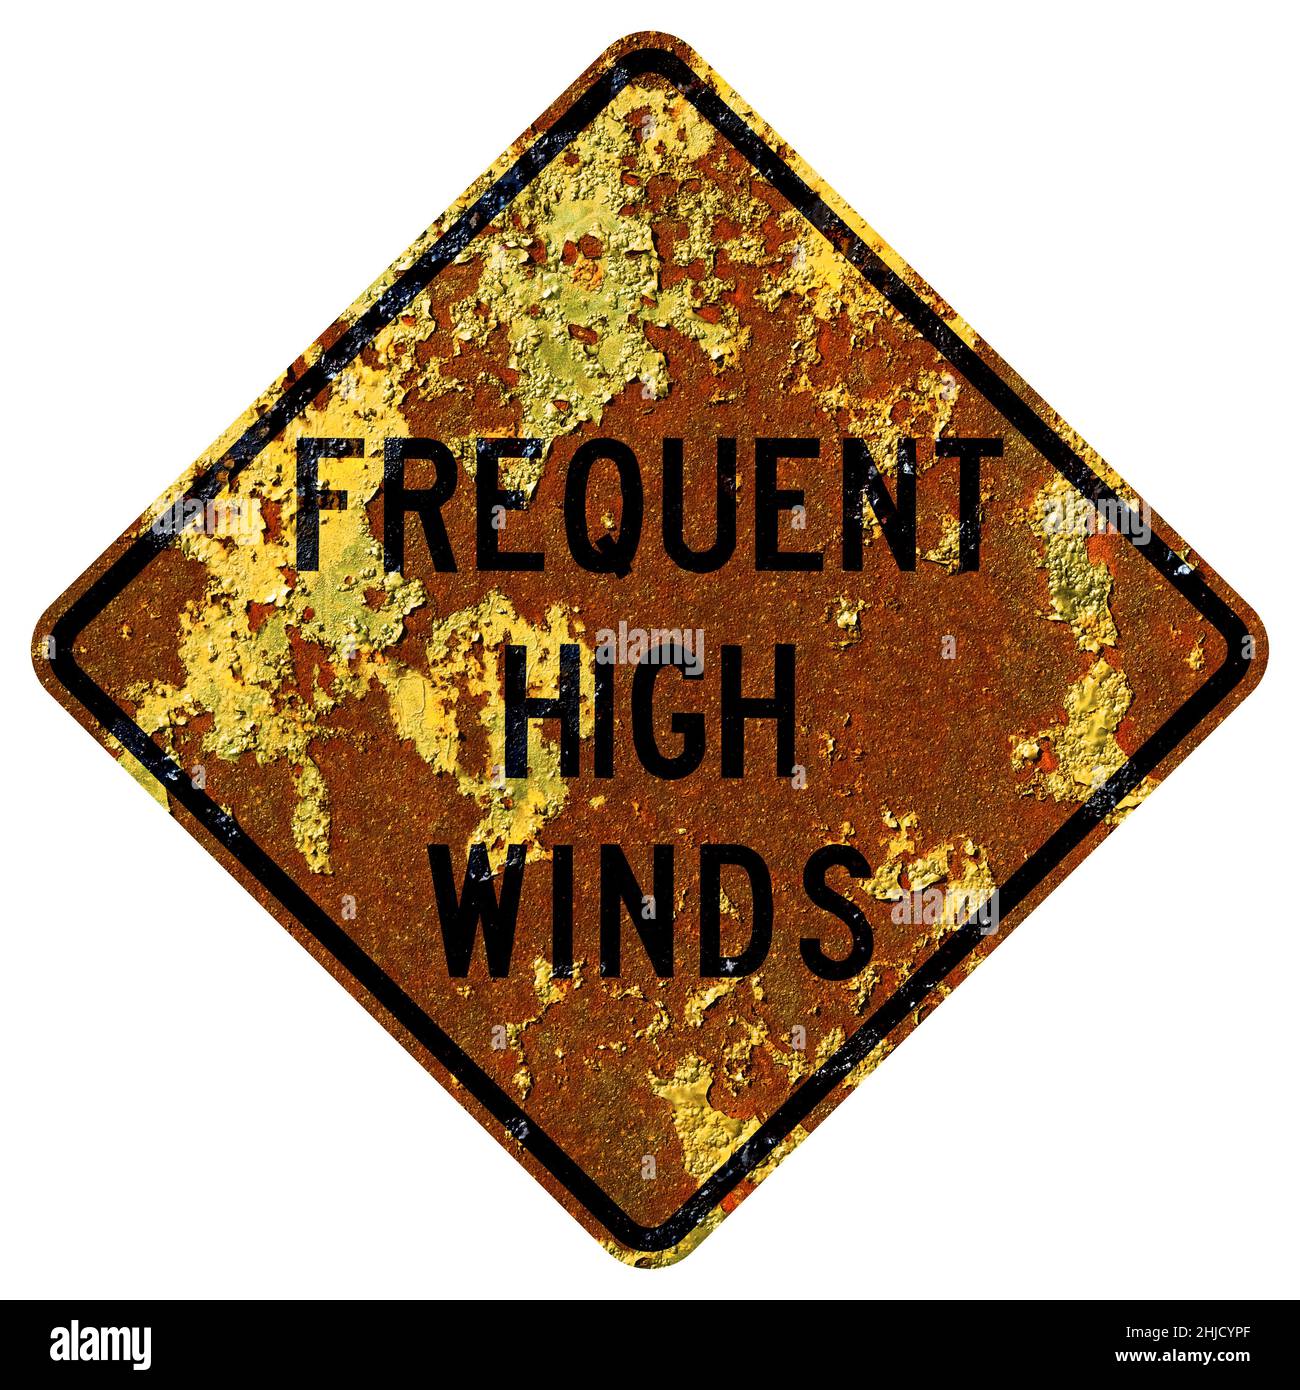 Old rusty American road sign - Frequent high winds, Idaho Stock Photo